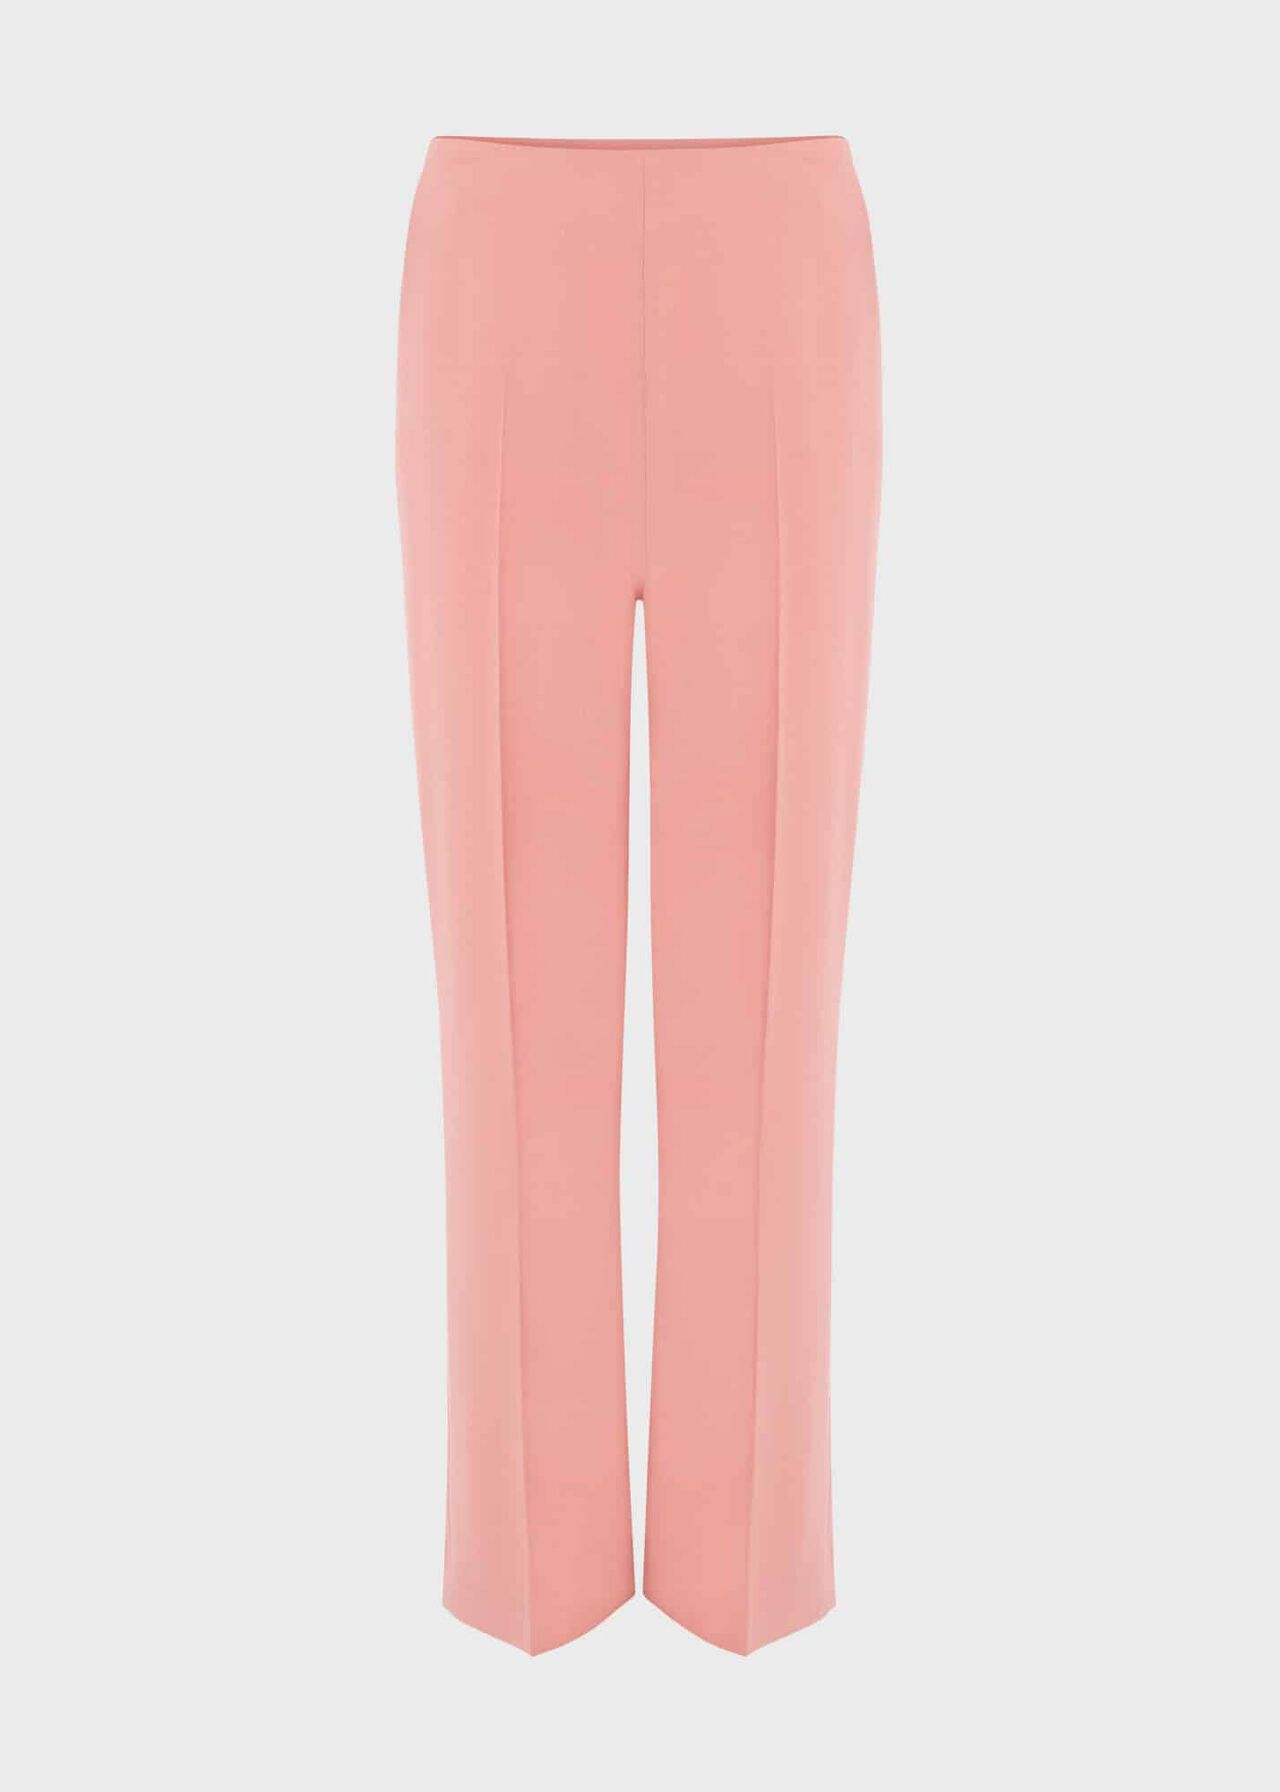 Rozi Trousers, Pink, hi-res